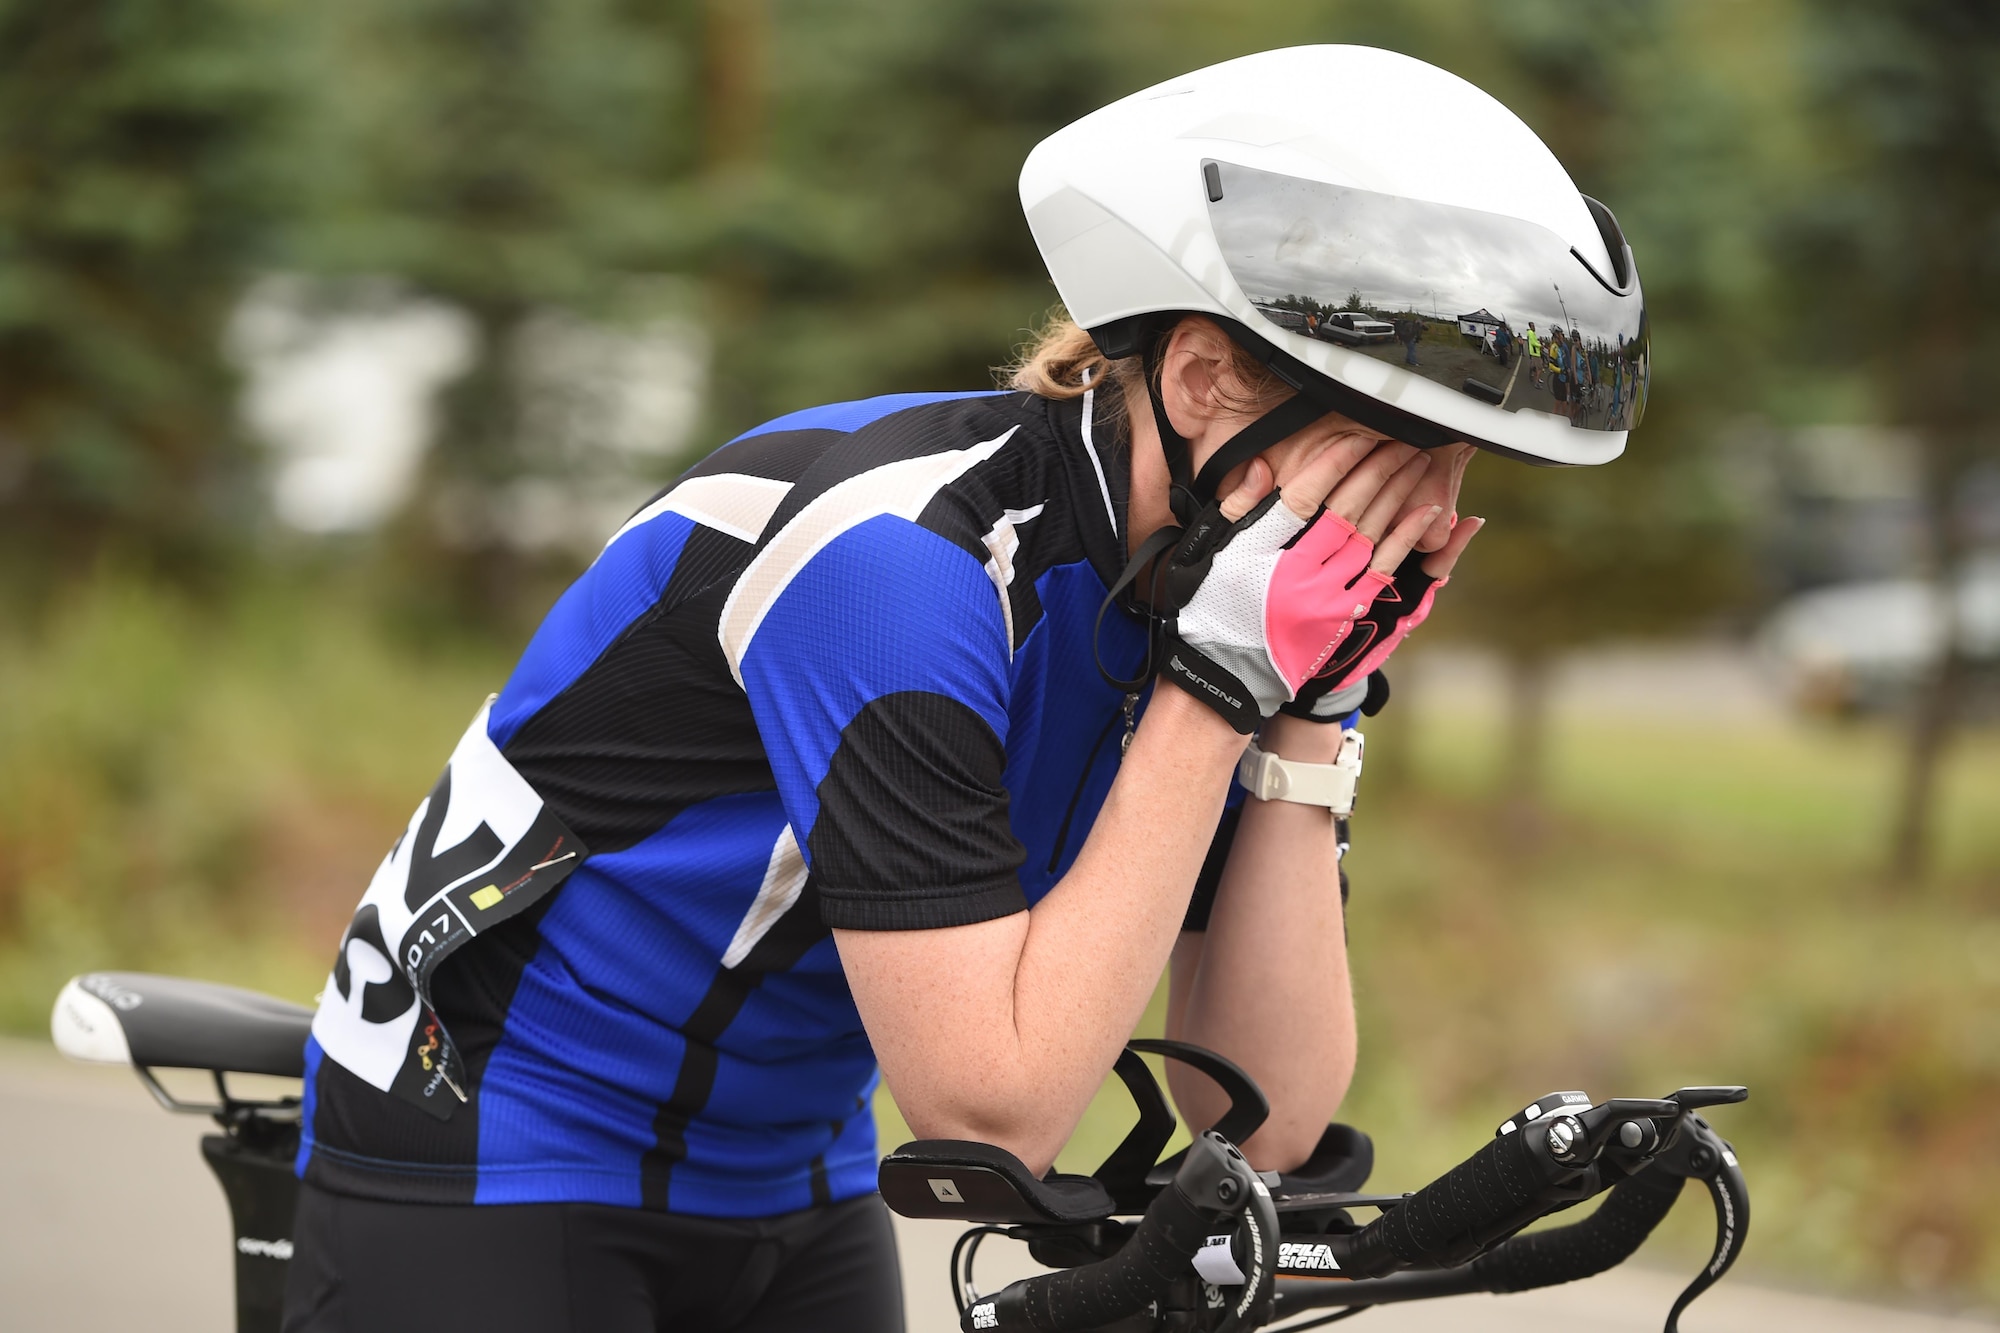 Joanne Allen wipes her face before the Moose Run time-trial race at Moose Run Golf Course at Joint Base Elmendorf-Richardson, Alaska, Aug. 3, 2017. For more than 15 years, the club has hosted road race events at JBER.